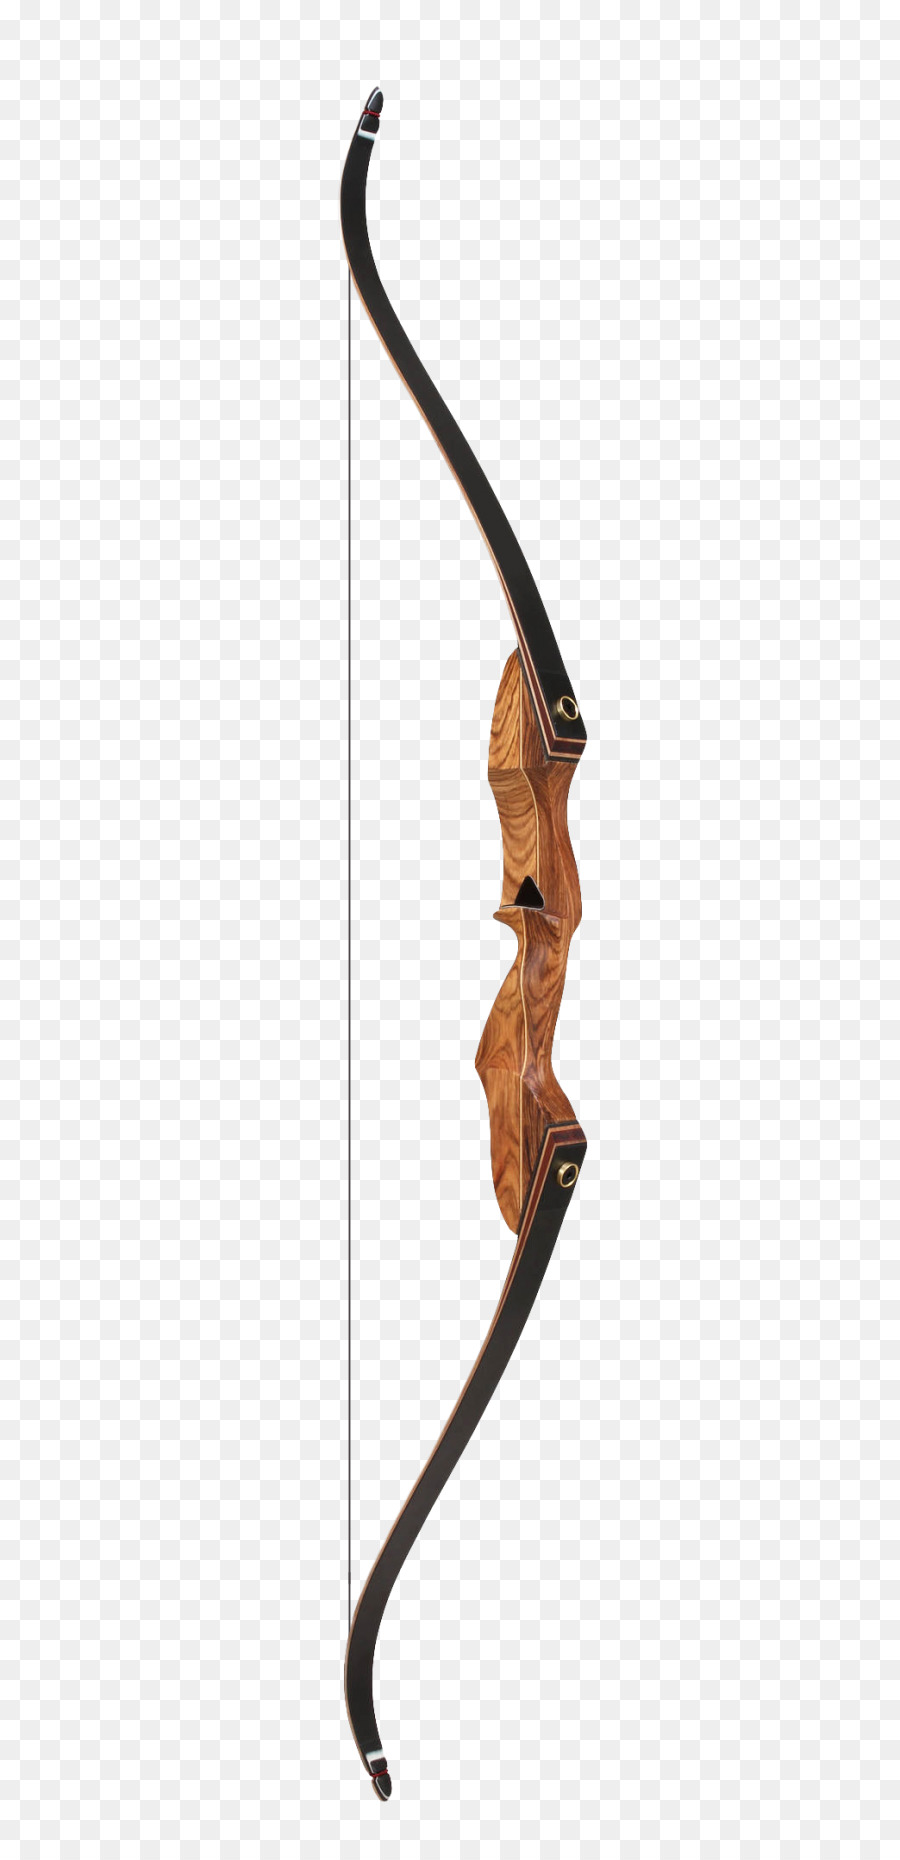 Bow and arrow Weapon Recurve bow - arrow bow png download - 500*1849 - Free Transparent Bow And Arrow png Download.